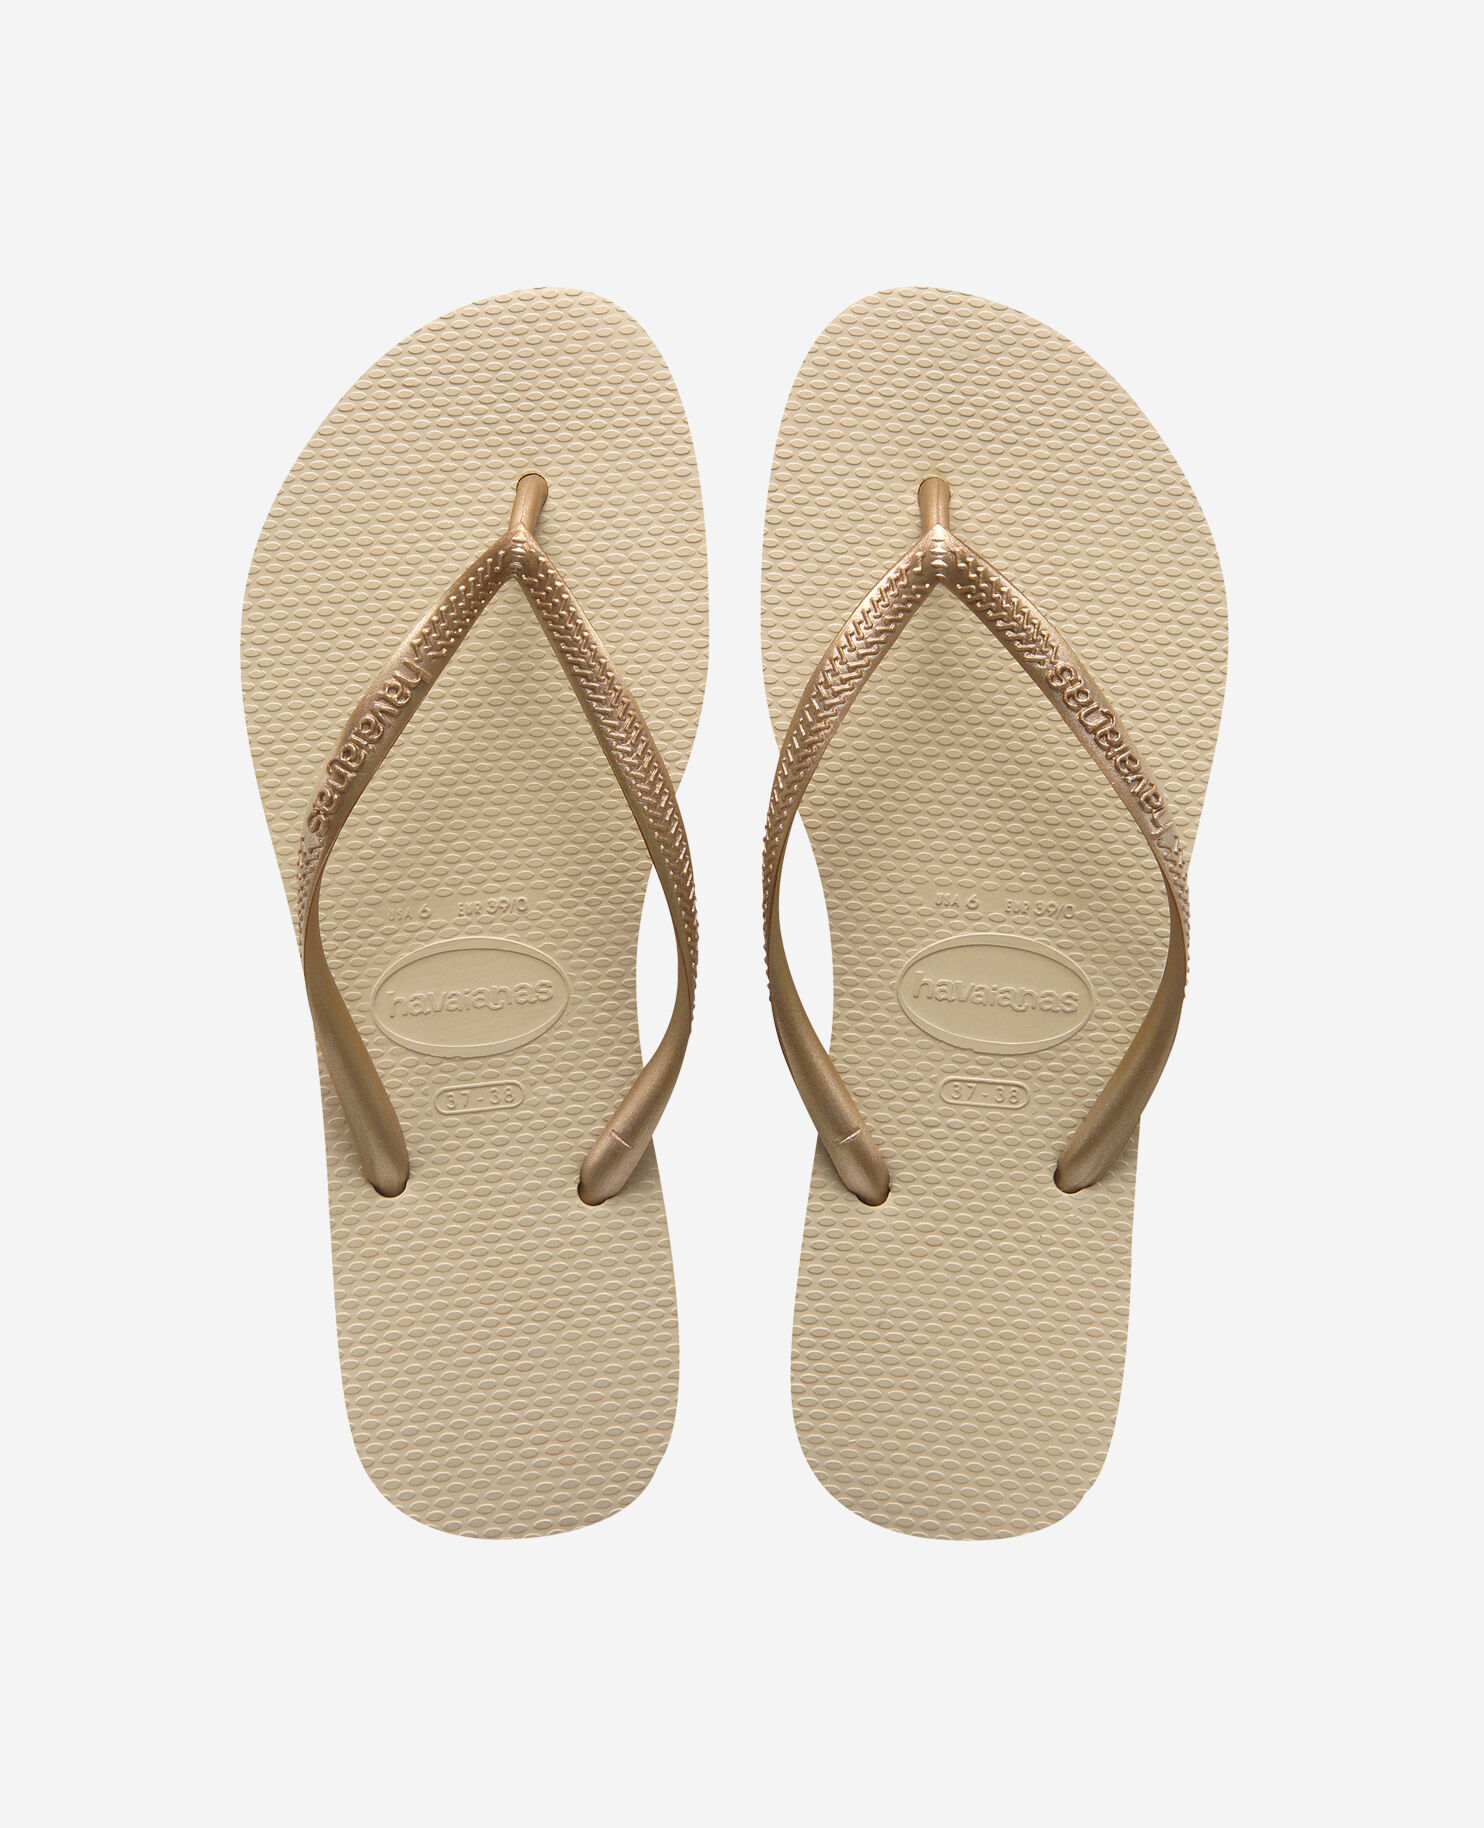 HAVAIANAS THONGS FLIP FLOPS SLIM FIT SAND COLOUR WITH HAVAIANAS  ON STRAP  BNWB